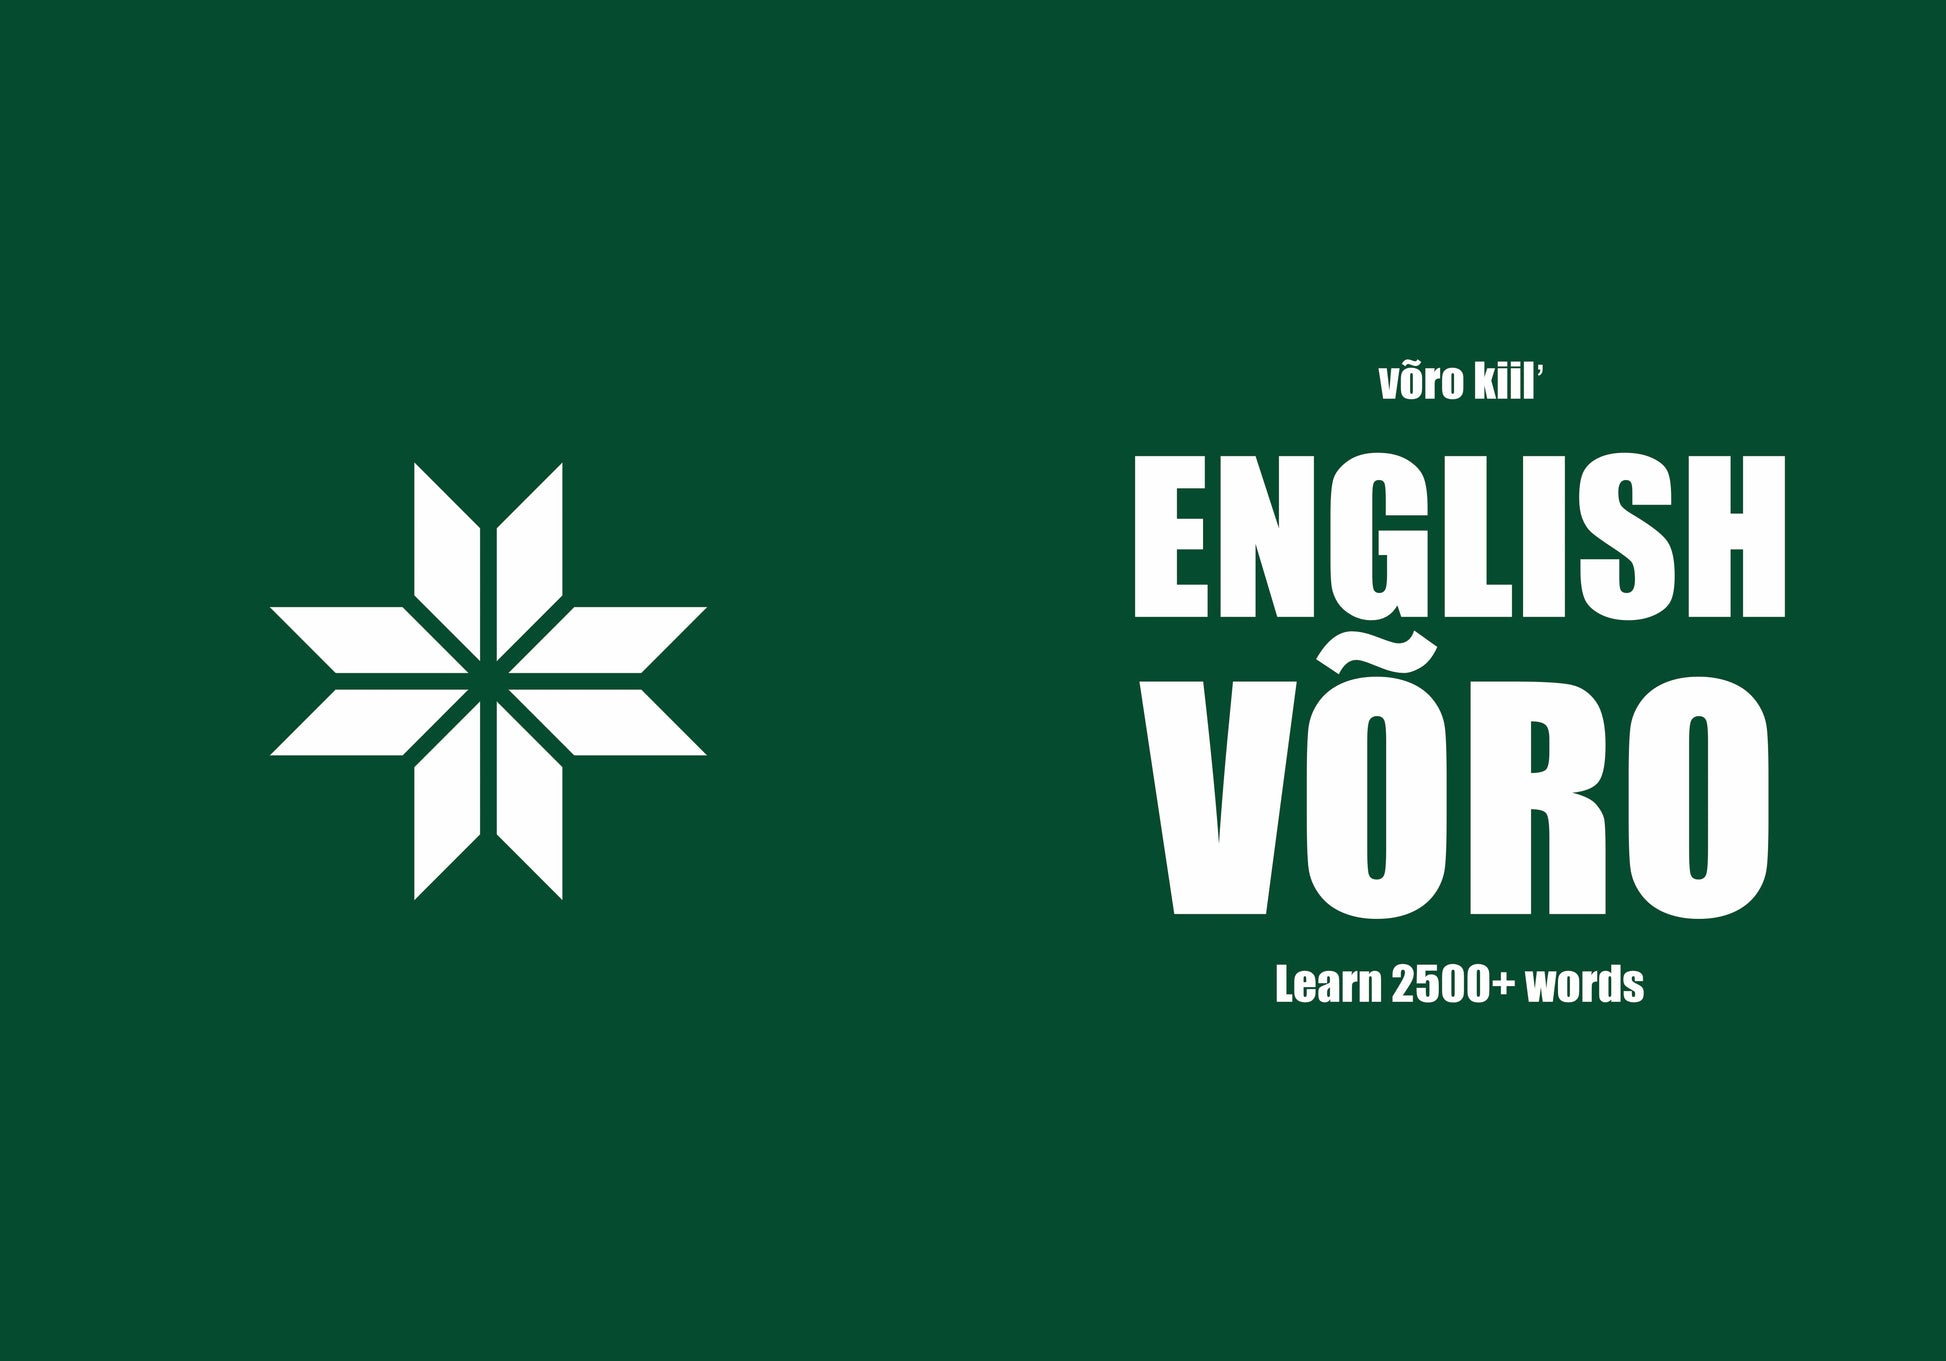 Võro language learning notebook cover